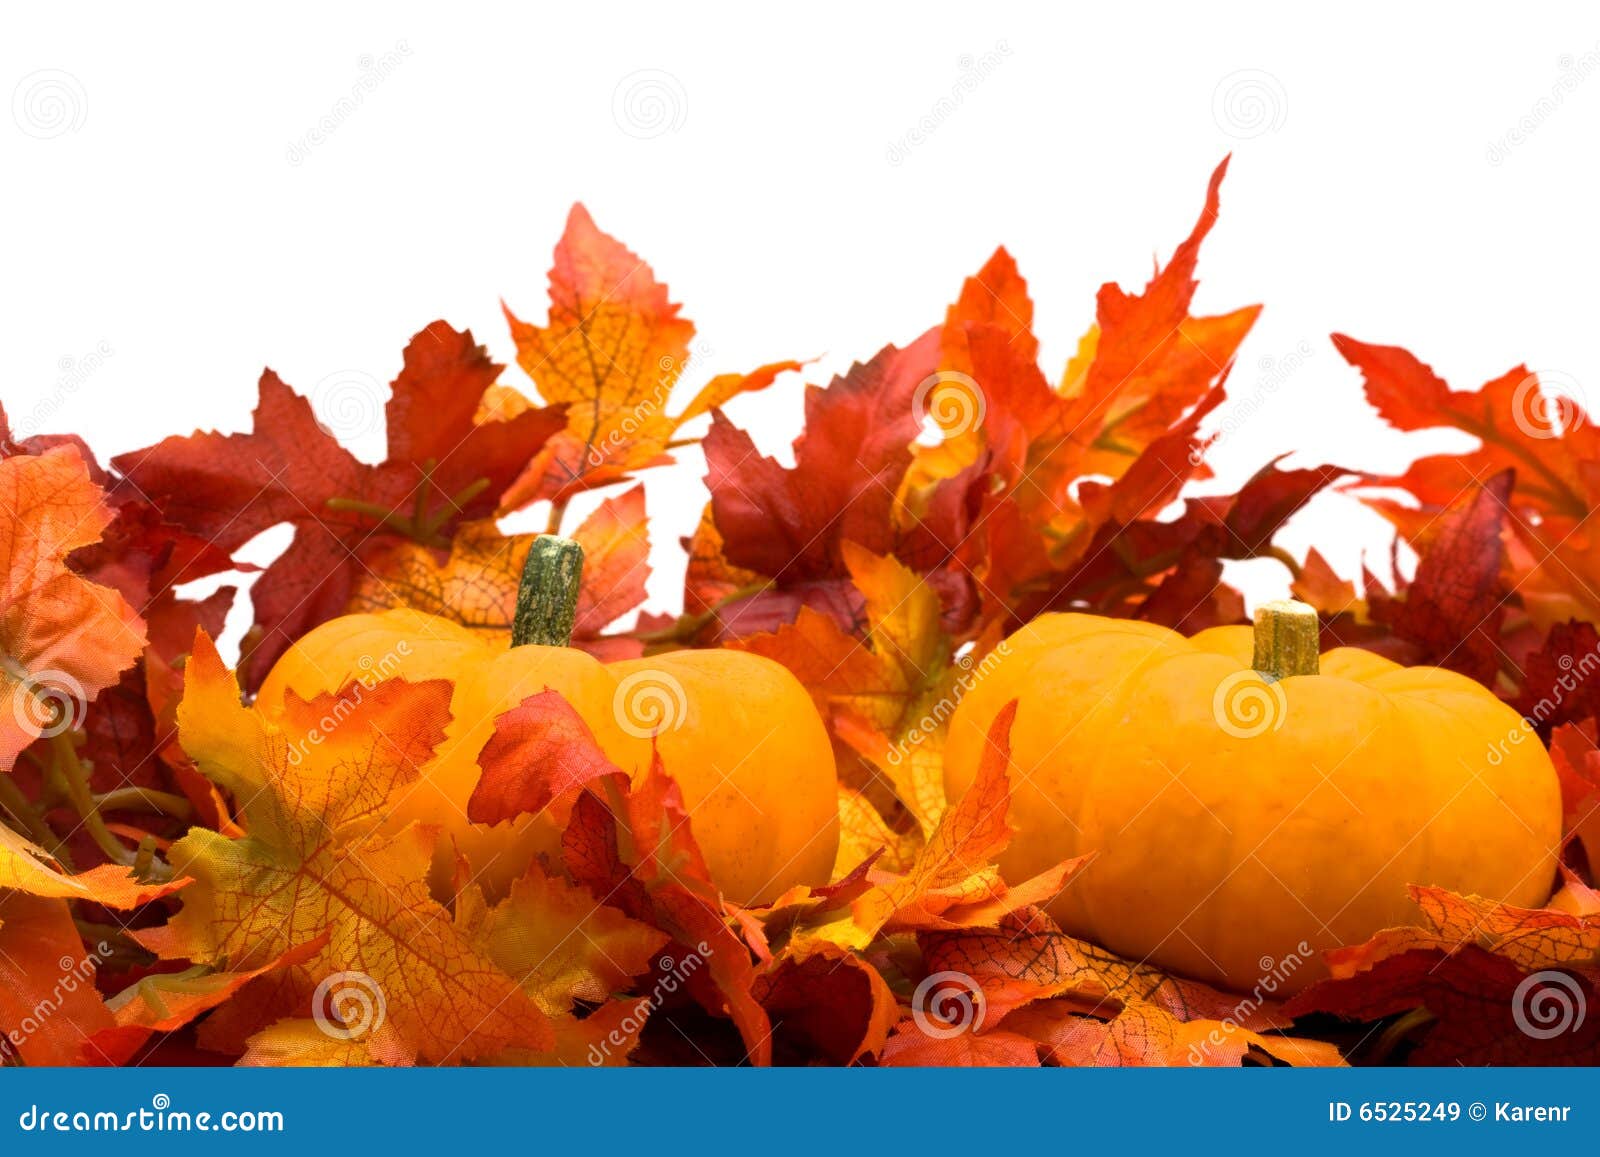 Fall Harvest Royalty Free Stock Images - Image: 6525249